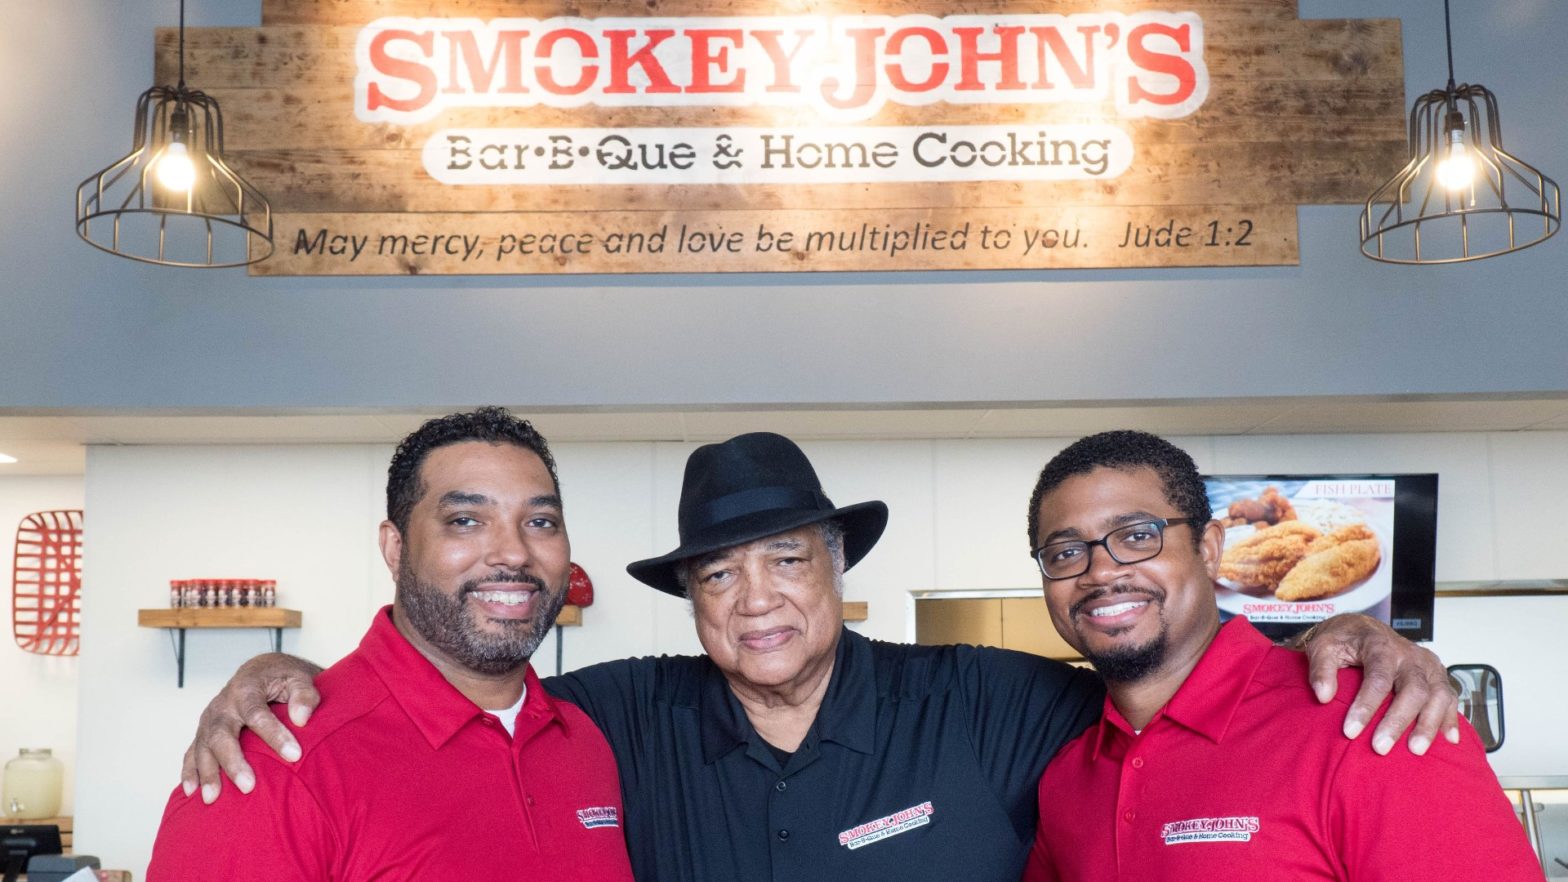 Brothers Brent and Juan Reaves Of Dallas' Smokey John's BBQ Join A&E’s Deep Fried Dynasty